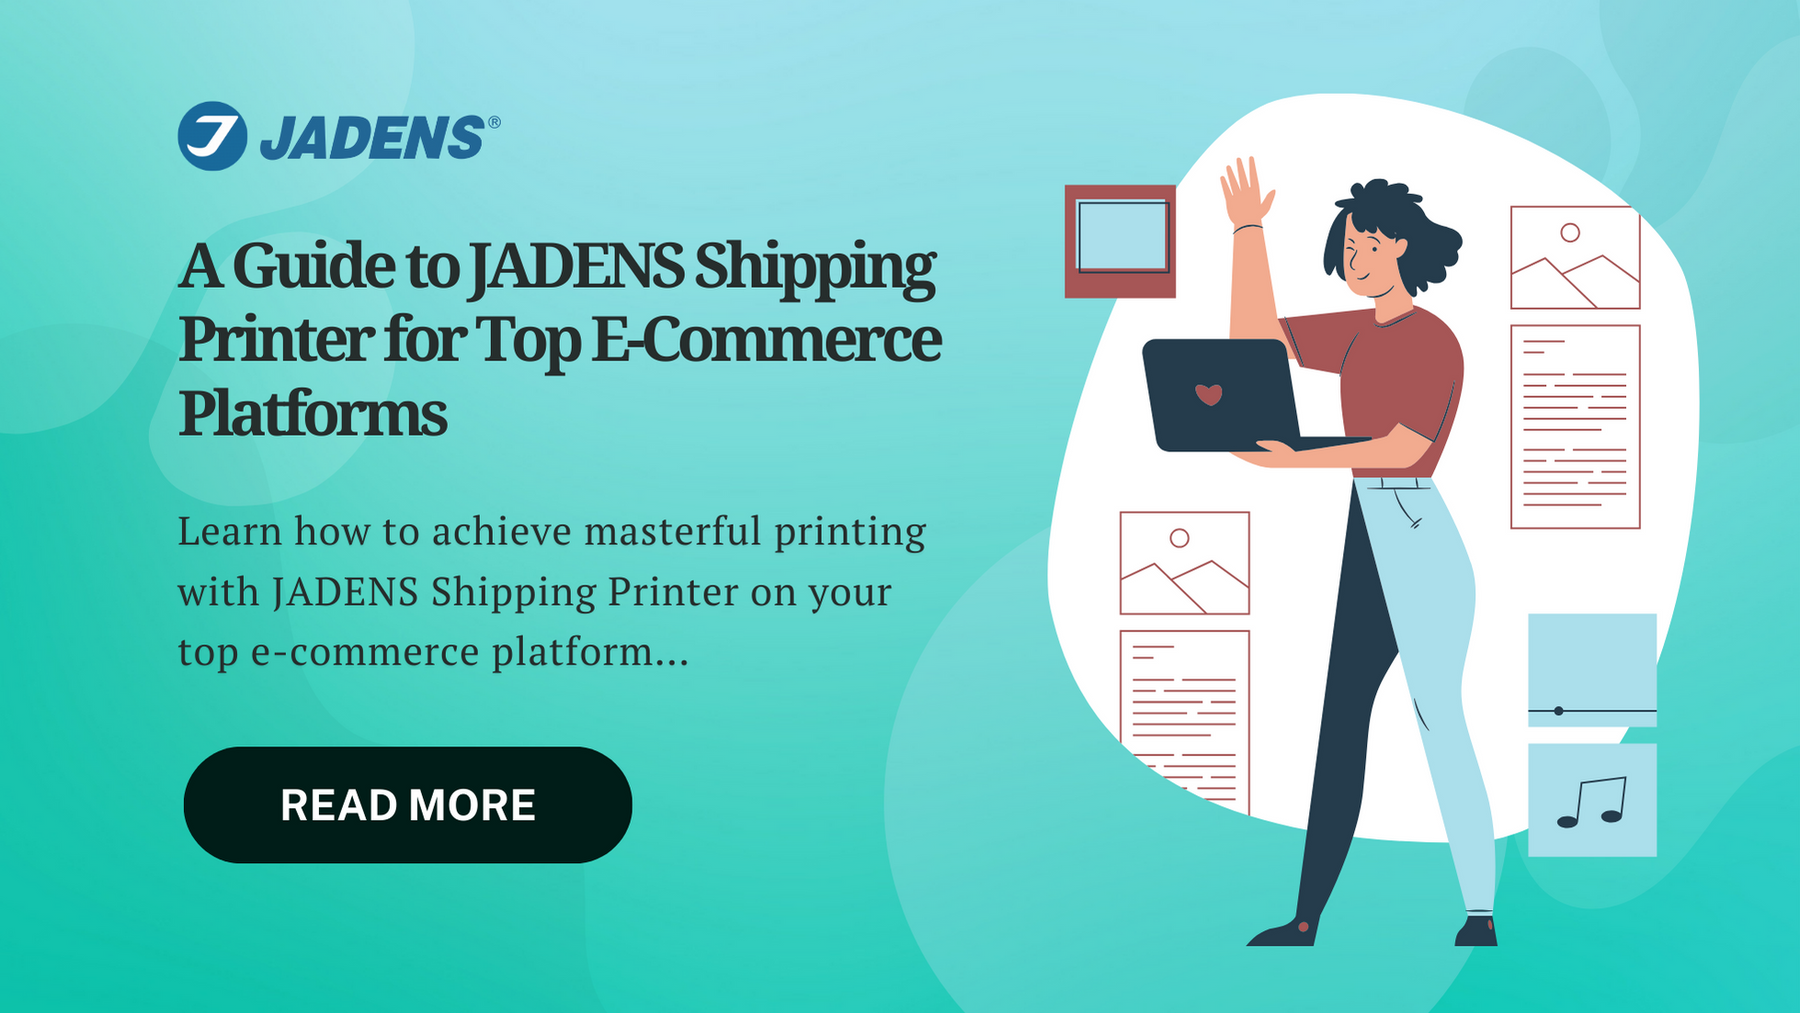 Masterful Printing: A Guide to JADENS Shipping Printer for Top E-Commerce Platforms